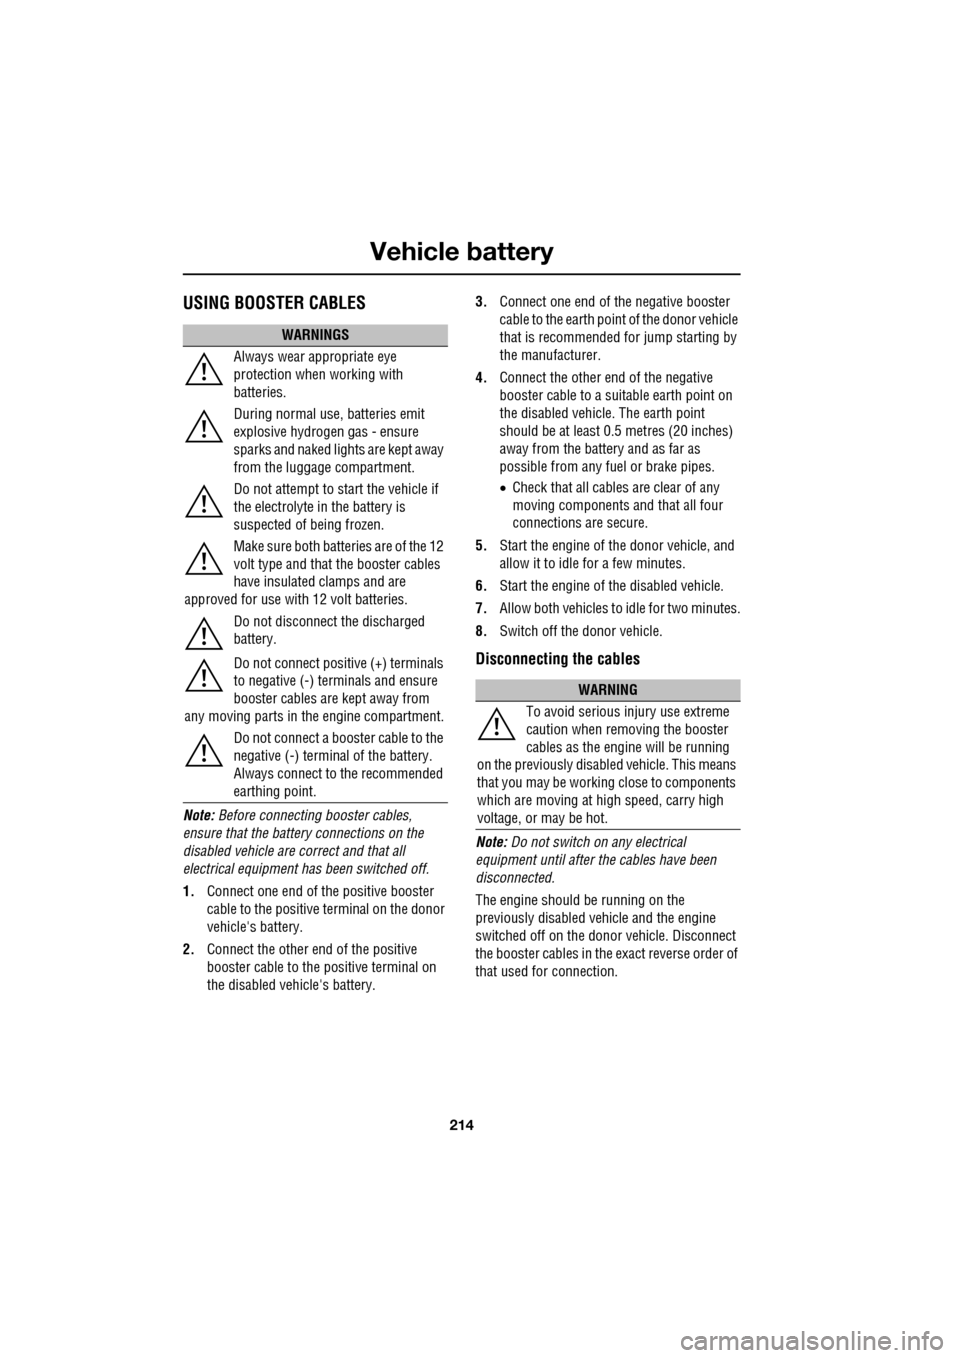 JAGUAR XF 2009 1.G Owners Manual Vehicle battery
214
               
USING BOOSTER CABLES
Note: Before connecti ng booster cables, 
ensure that the battery connections on the 
disabled vehicle are correct and that all 
electrical equ